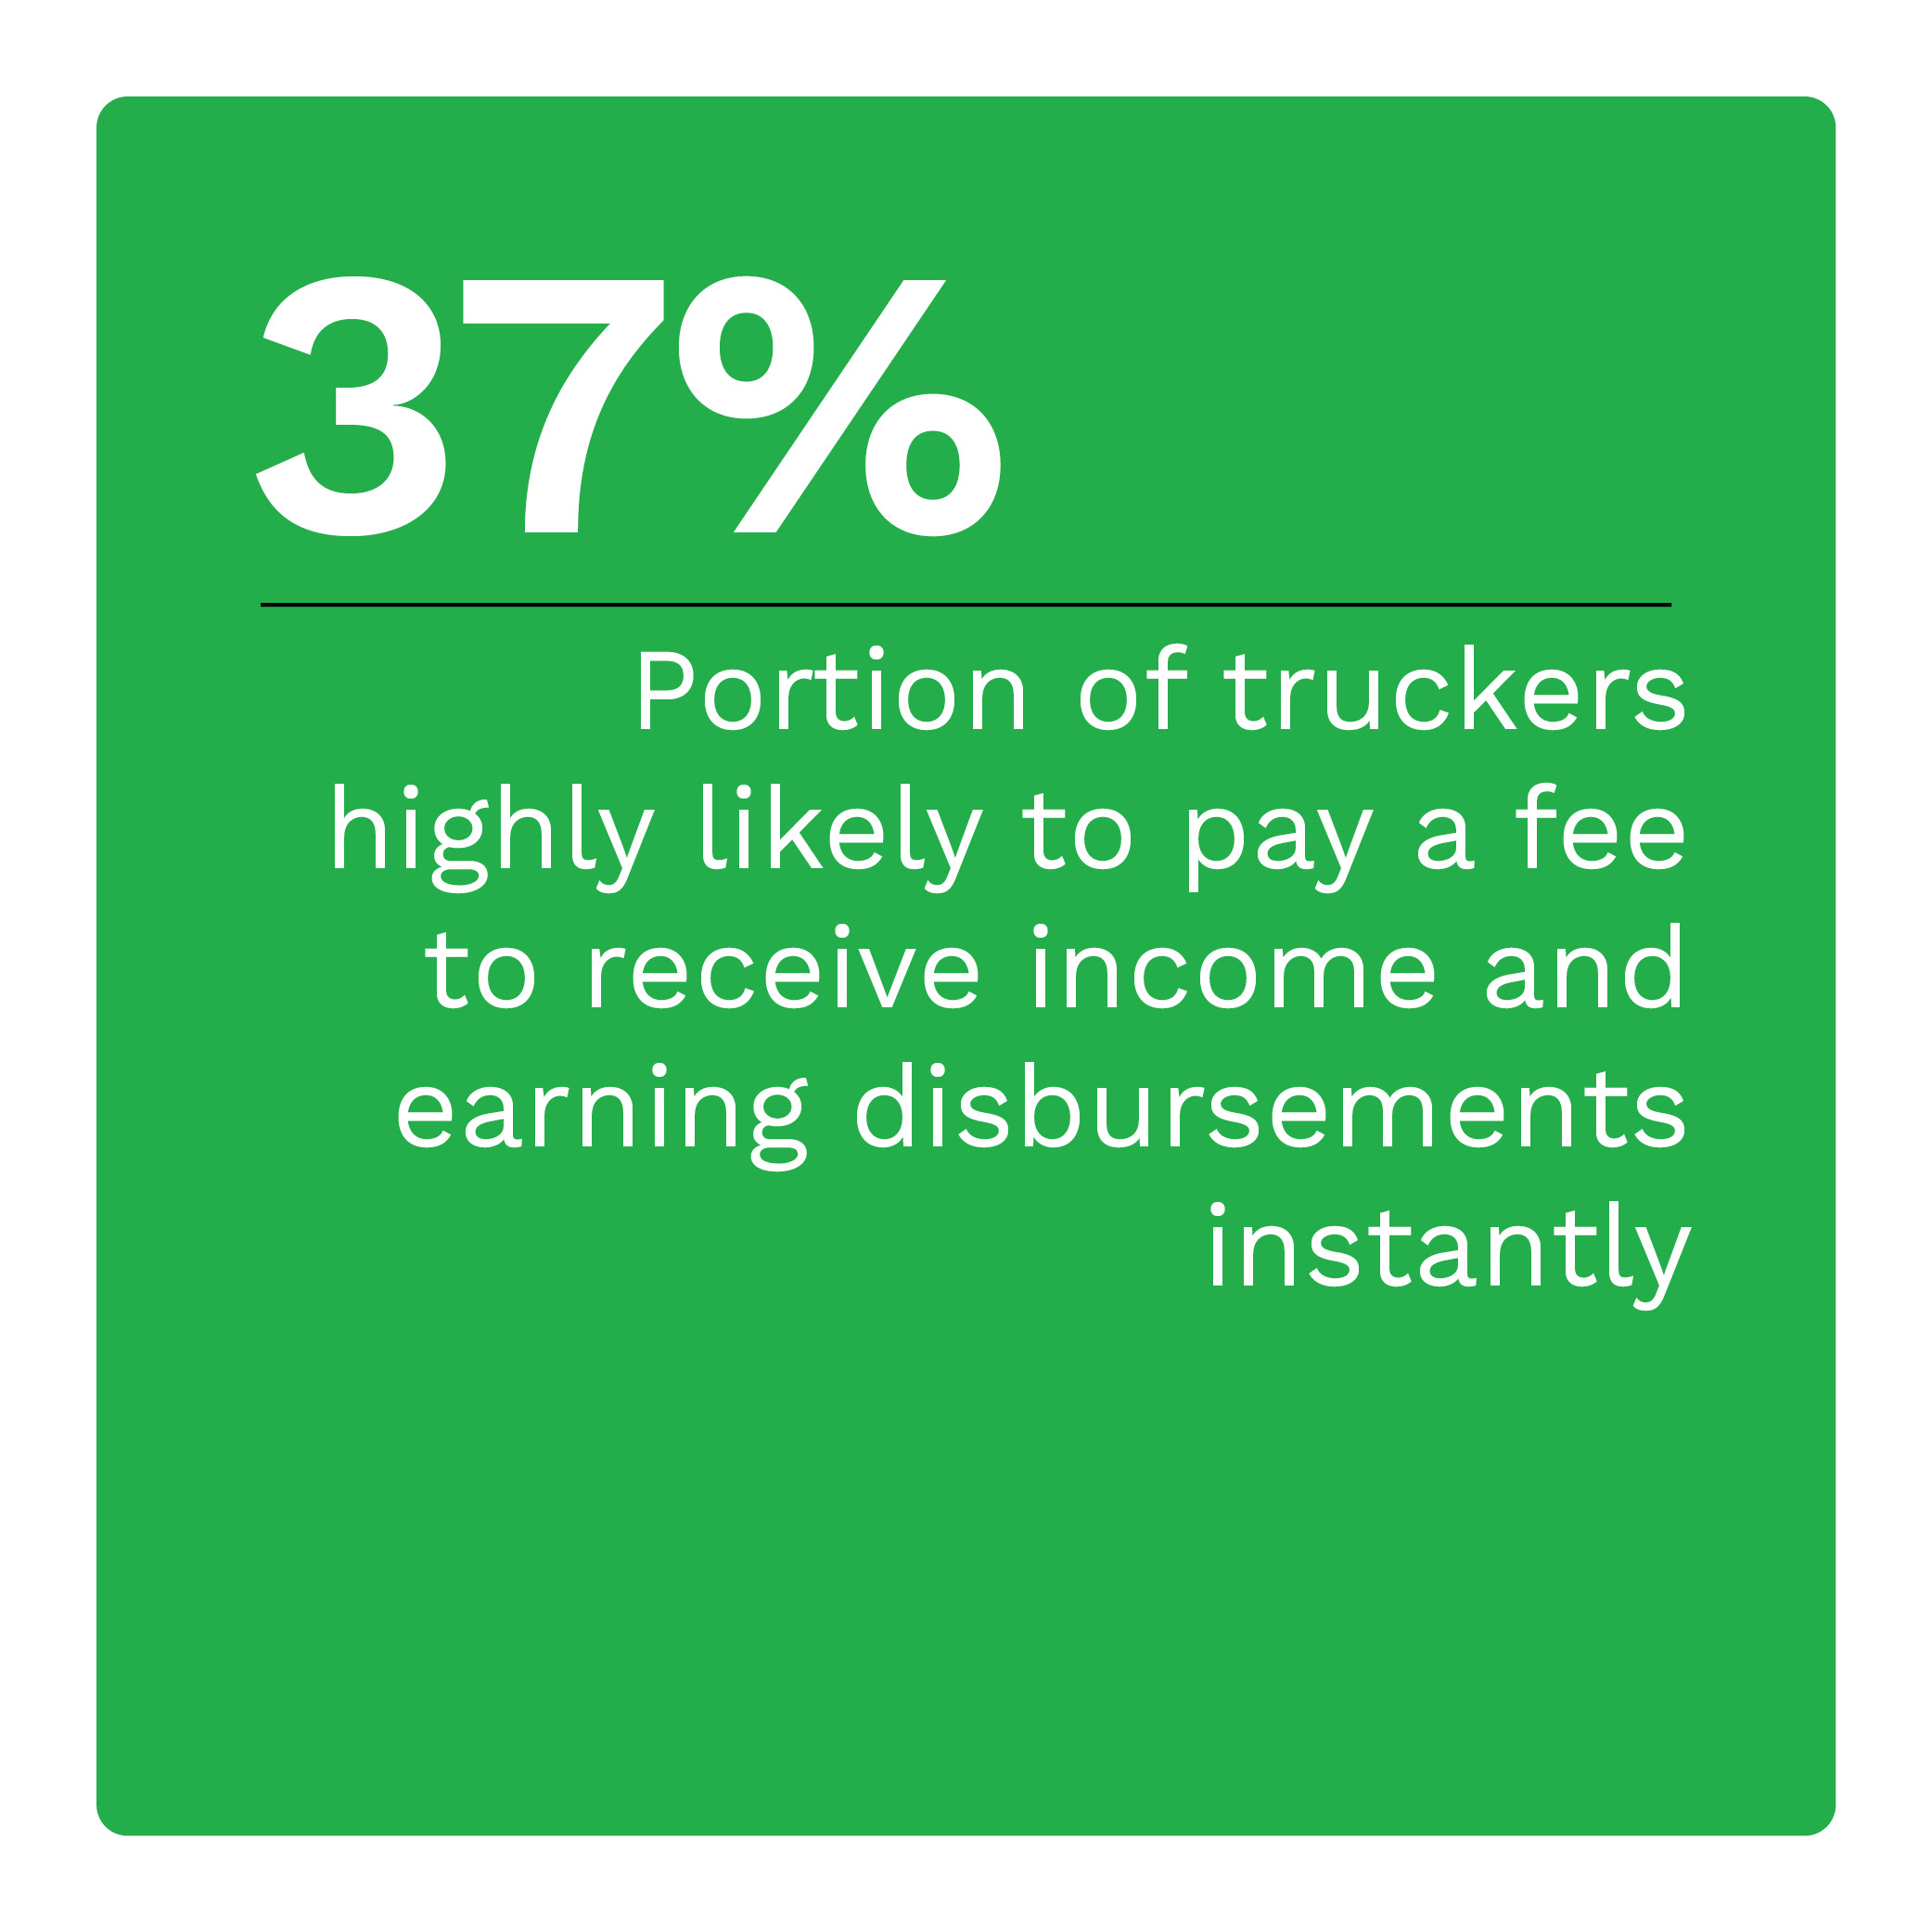 37%: Portion of truckers highly likely to pay a fee to receive income and earning disbursements instantly 